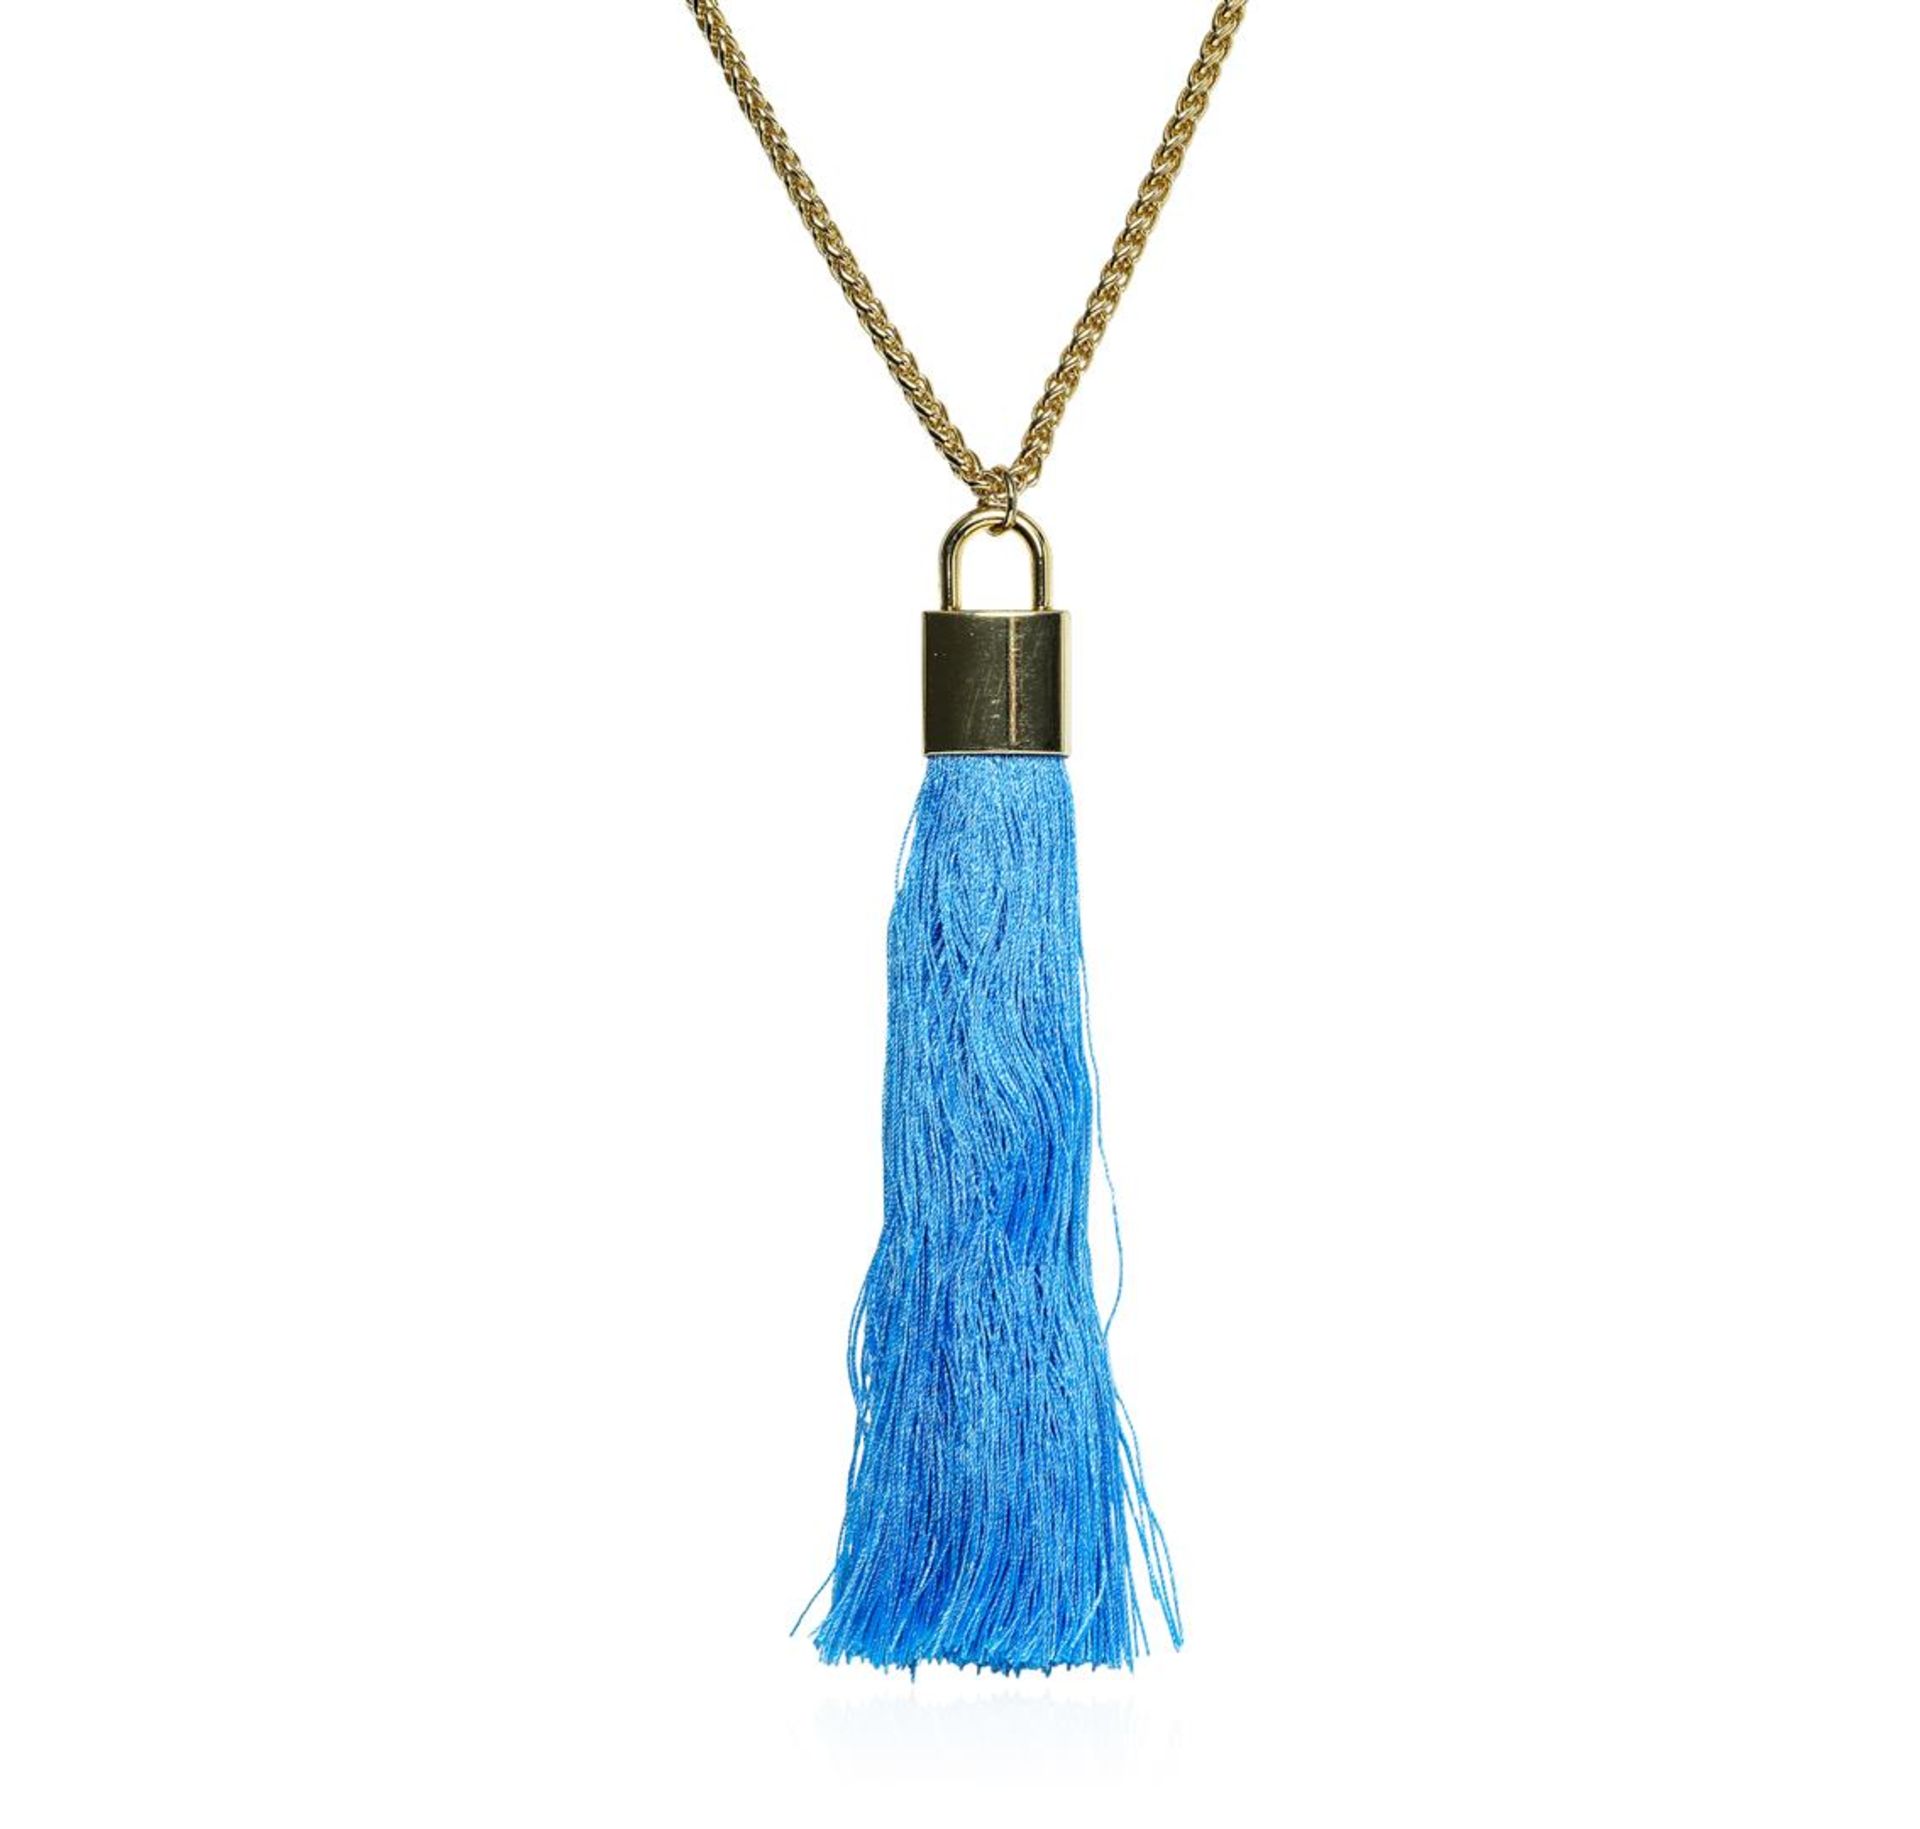 Silk Tassel Square Pendant Necklace - Gold Plated - Image 2 of 2